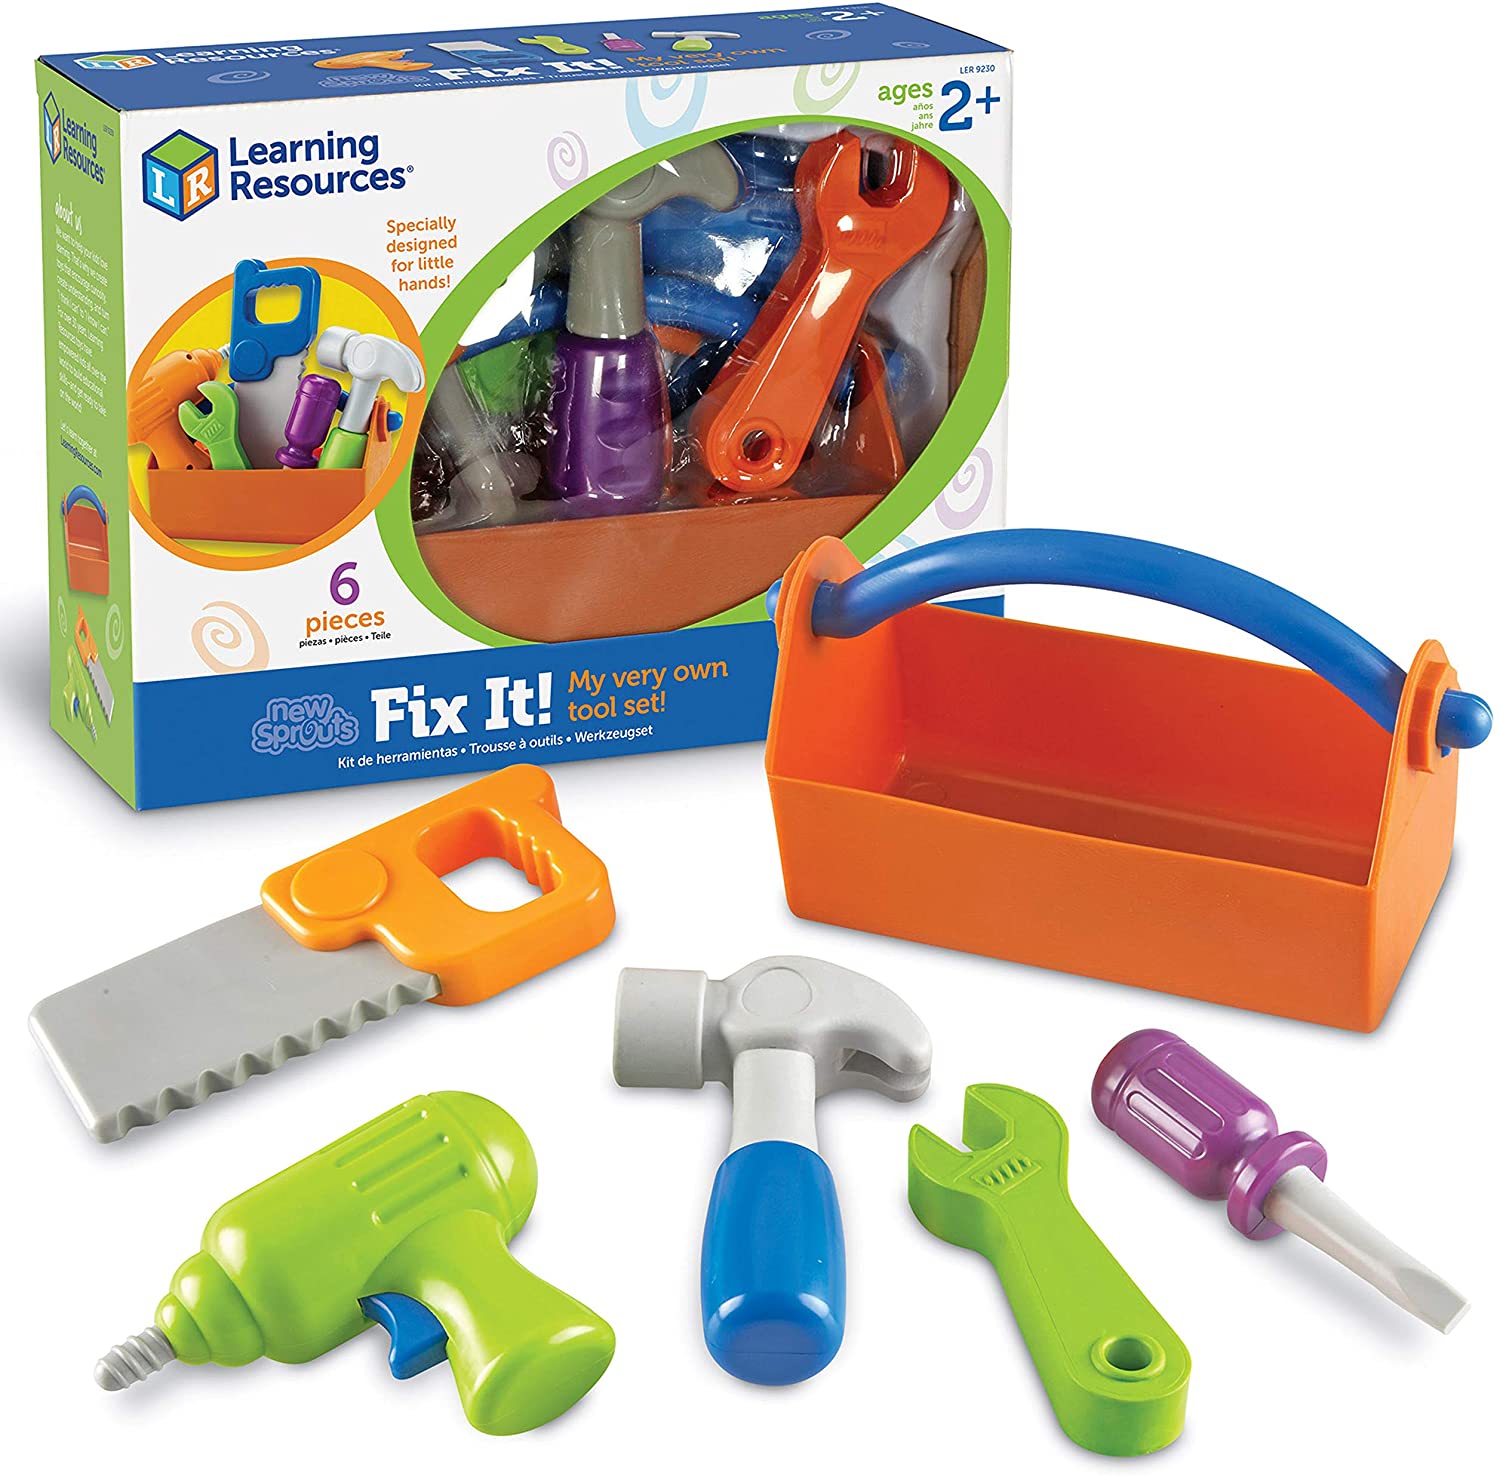 Kids Childrens Toy Building Tool Kit Boy Builder Construction Play Set Gift 